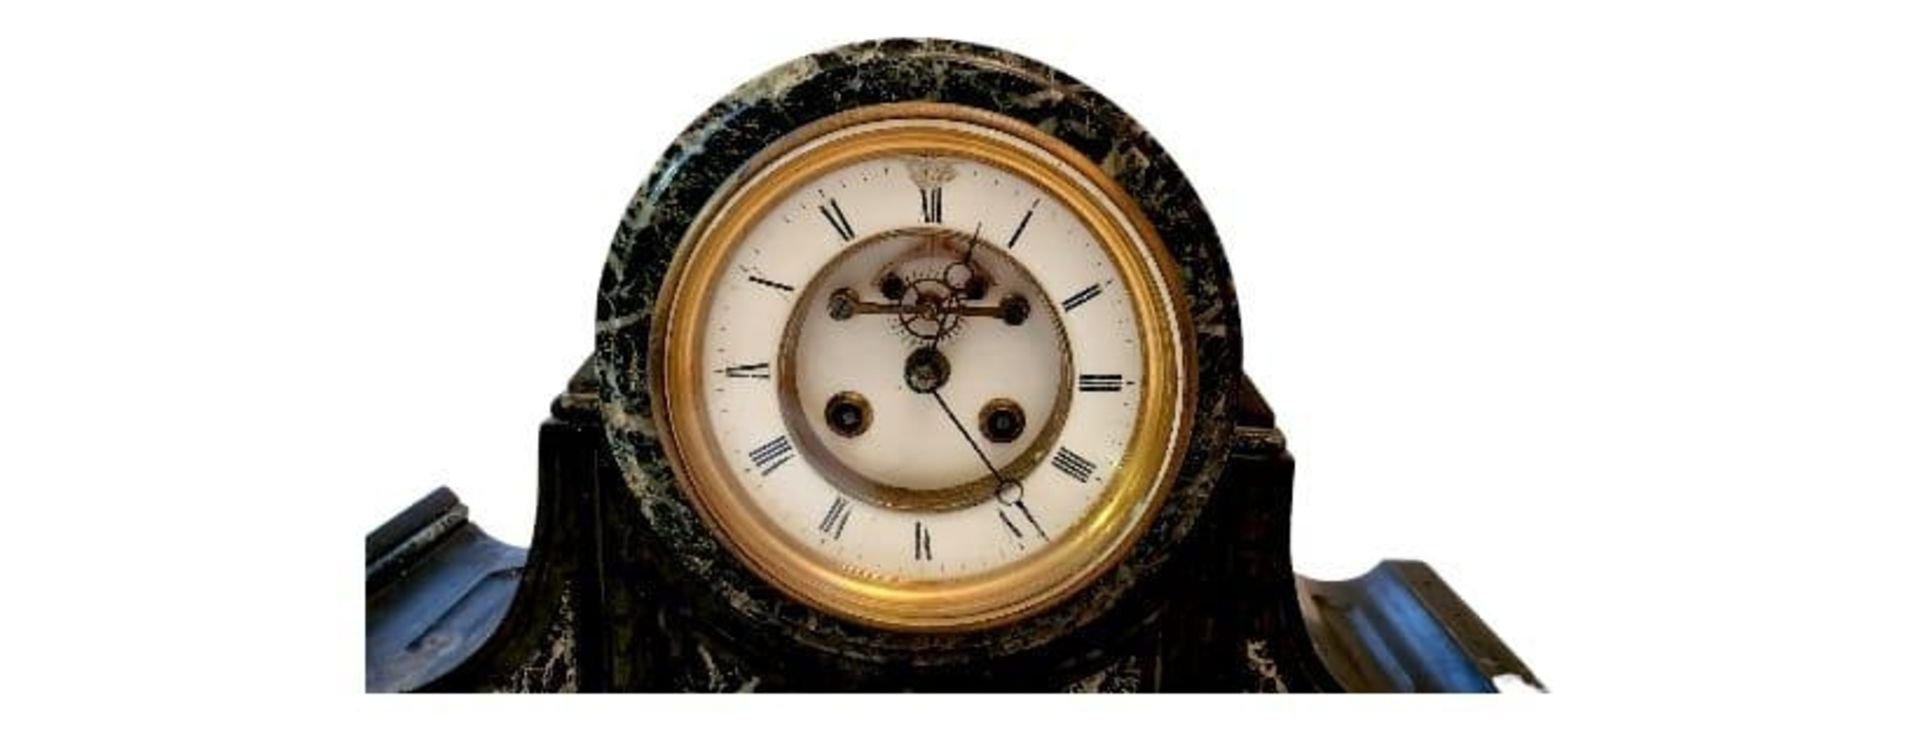 A Victorian Slate Mantel Clock with Eight Day French Bell Strike Movement and Visual Escapement. - Image 6 of 13